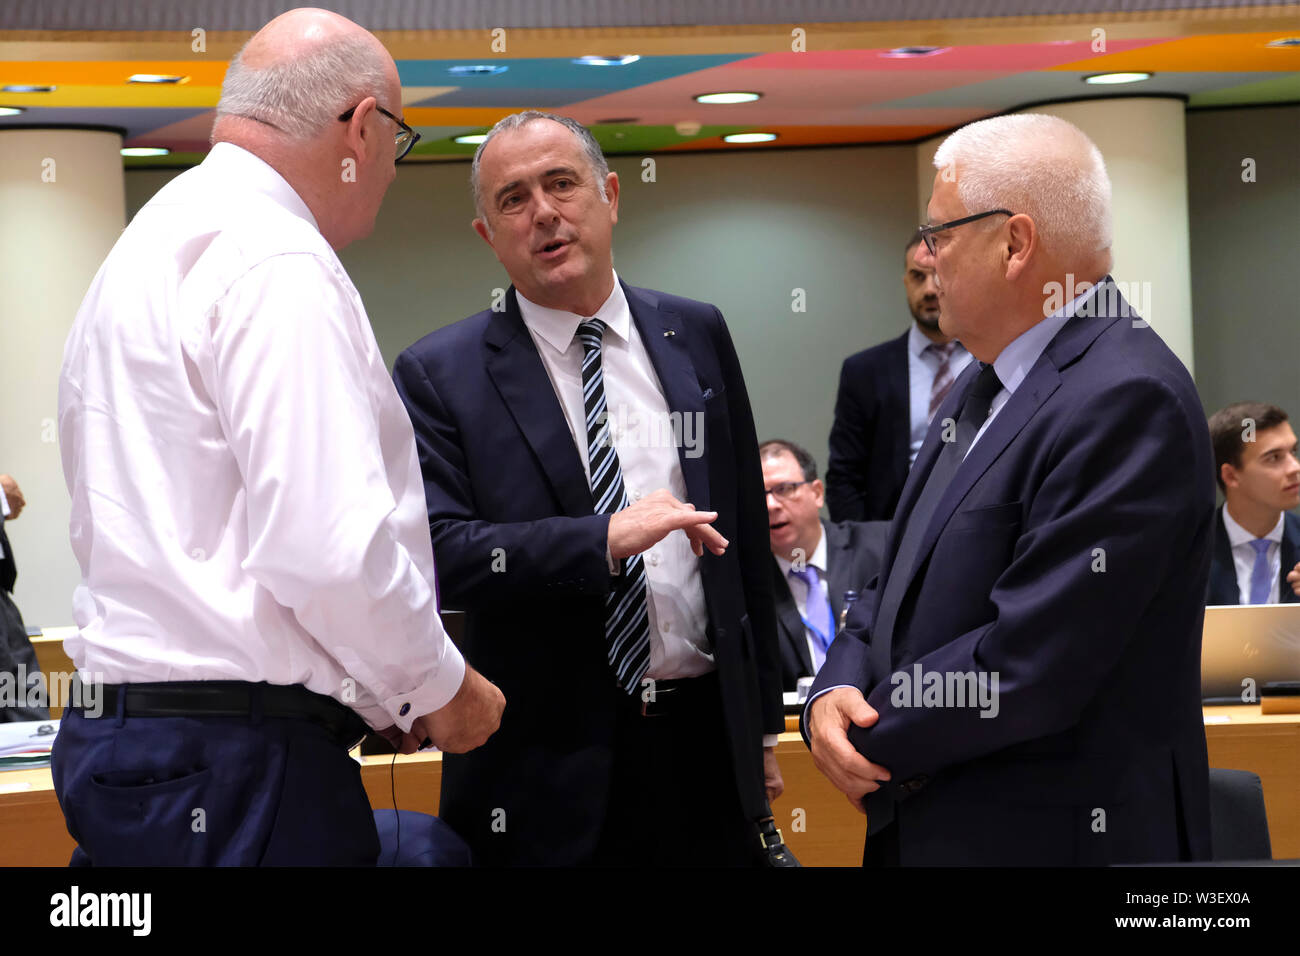 Brussels, Belgium, 15th July 2019. Didier Guillaume Minister of Agriculture of France attends in an European Union agriculture and fisheries council meeting. Credit: ALEXANDROS MICHAILIDIS/Alamy Live News Stock Photo